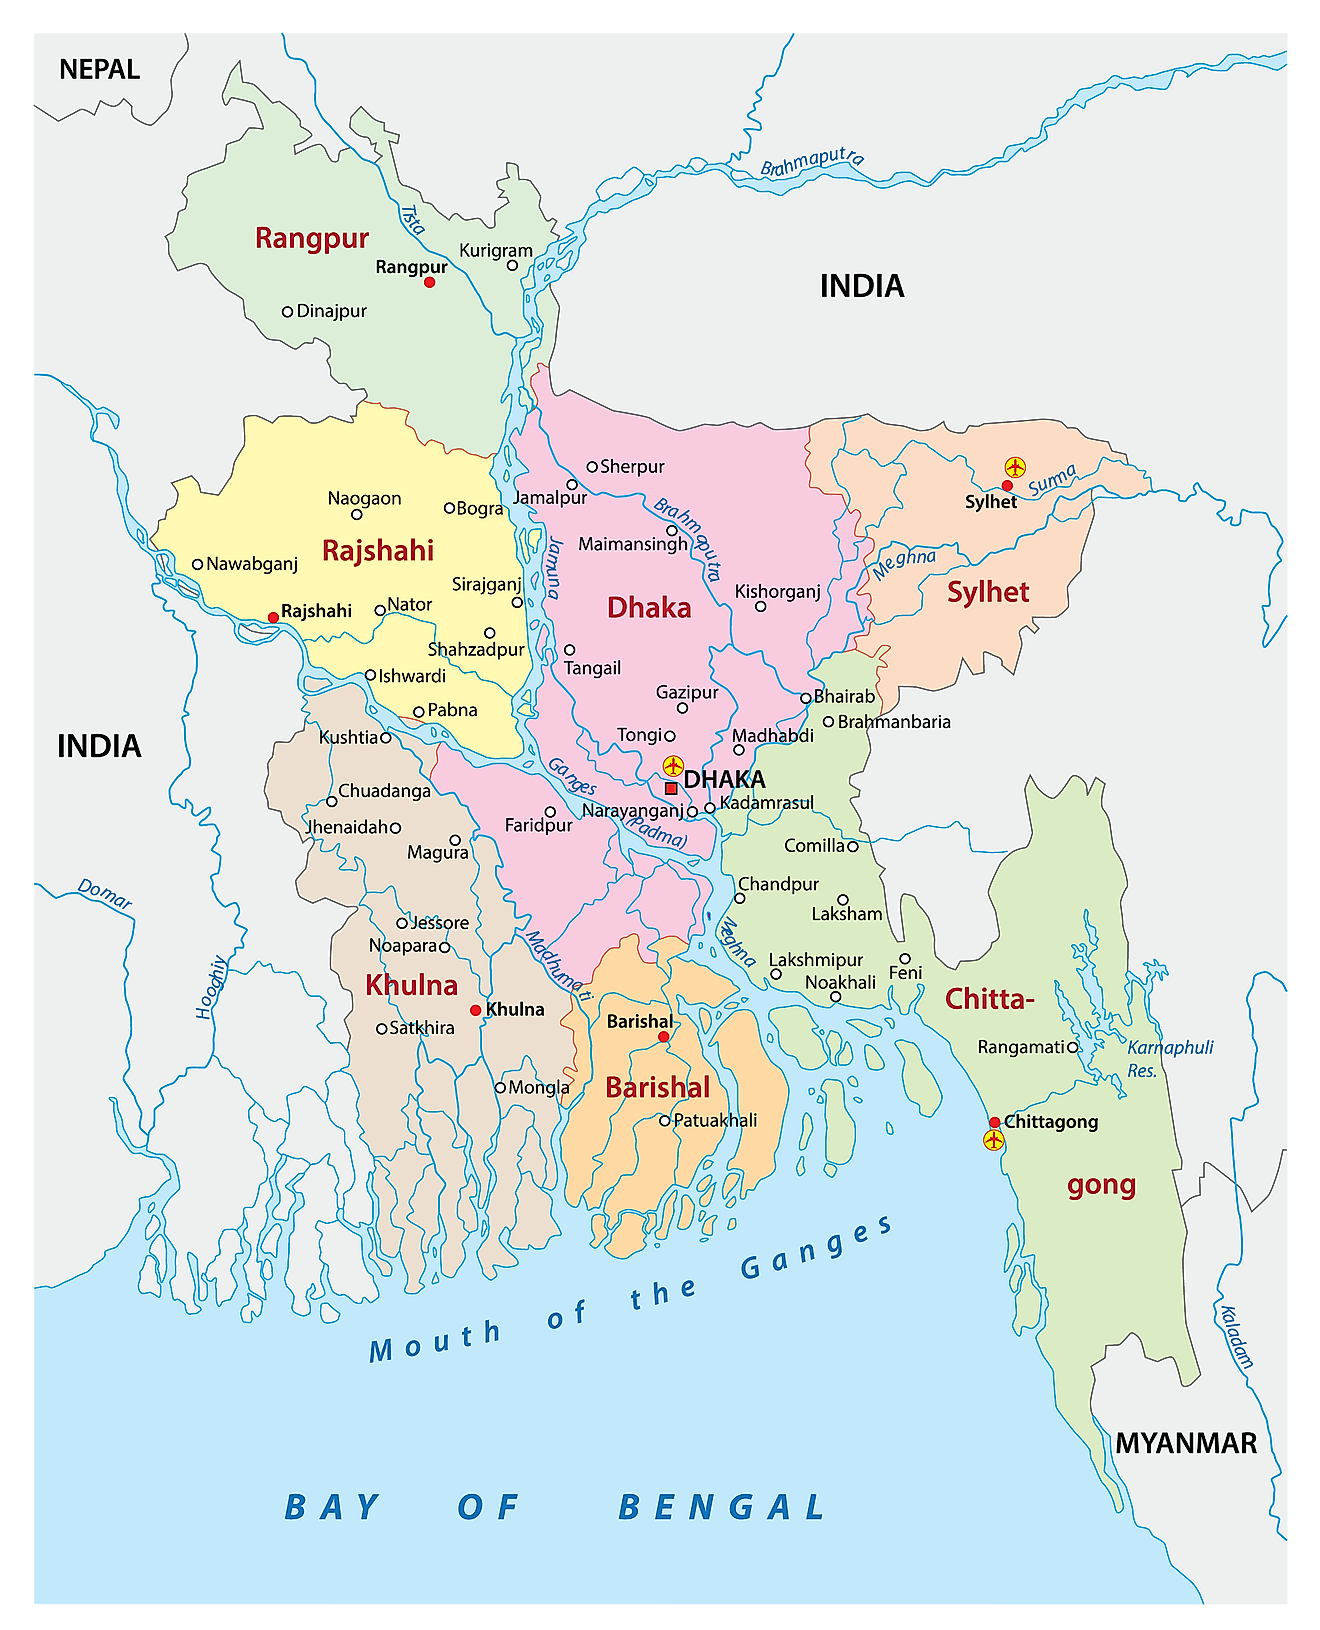 Political Map of Bangladesh showing the 8 Bibhags, their capitals, and the national capital city of Dhaka.